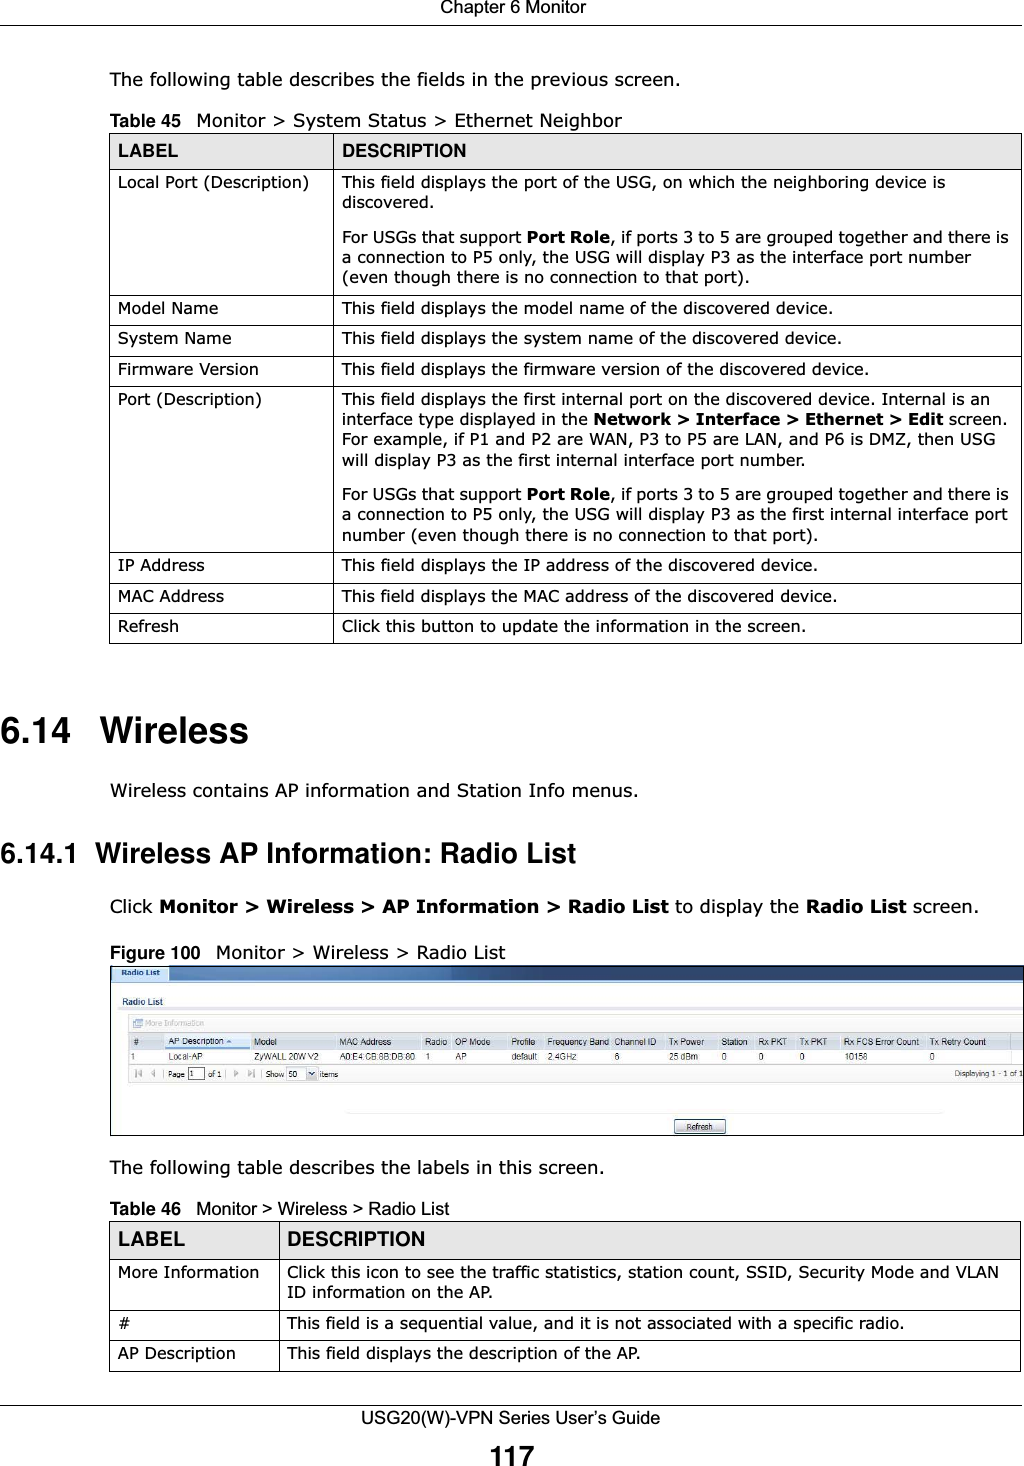  Chapter 6 MonitorUSG20(W)-VPN Series User’s Guide117The following table describes the fields in the previous screen.6.14 WirelessWireless contains AP information and Station Info menus.6.14.1  Wireless AP Information: Radio ListClick Monitor &gt; Wireless &gt; AP Information &gt; Radio List to display the Radio List screen.Figure 100   Monitor &gt; Wireless &gt; Radio ListThe following table describes the labels in this screen.Table 45   Monitor &gt; System Status &gt; Ethernet NeighborLABEL DESCRIPTIONLocal Port (Description) This field displays the port of the USG, on which the neighboring device is discovered.For USGs that support Port Role, if ports 3 to 5 are grouped together and there is a connection to P5 only, the USG will display P3 as the interface port number (even though there is no connection to that port).Model Name This field displays the model name of the discovered device.System Name This field displays the system name of the discovered device.Firmware Version This field displays the firmware version of the discovered device.Port (Description) This field displays the first internal port on the discovered device. Internal is an interface type displayed in the Network &gt; Interface &gt; Ethernet &gt; Edit screen. For example, if P1 and P2 are WAN, P3 to P5 are LAN, and P6 is DMZ, then USG will display P3 as the first internal interface port number. For USGs that support Port Role, if ports 3 to 5 are grouped together and there is a connection to P5 only, the USG will display P3 as the first internal interface port number (even though there is no connection to that port).IP Address This field displays the IP address of the discovered device.MAC Address This field displays the MAC address of the discovered device.Refresh Click this button to update the information in the screen.Table 46   Monitor &gt; Wireless &gt; Radio ListLABEL DESCRIPTIONMore Information Click this icon to see the traffic statistics, station count, SSID, Security Mode and VLAN ID information on the AP.# This field is a sequential value, and it is not associated with a specific radio.AP Description This field displays the description of the AP.